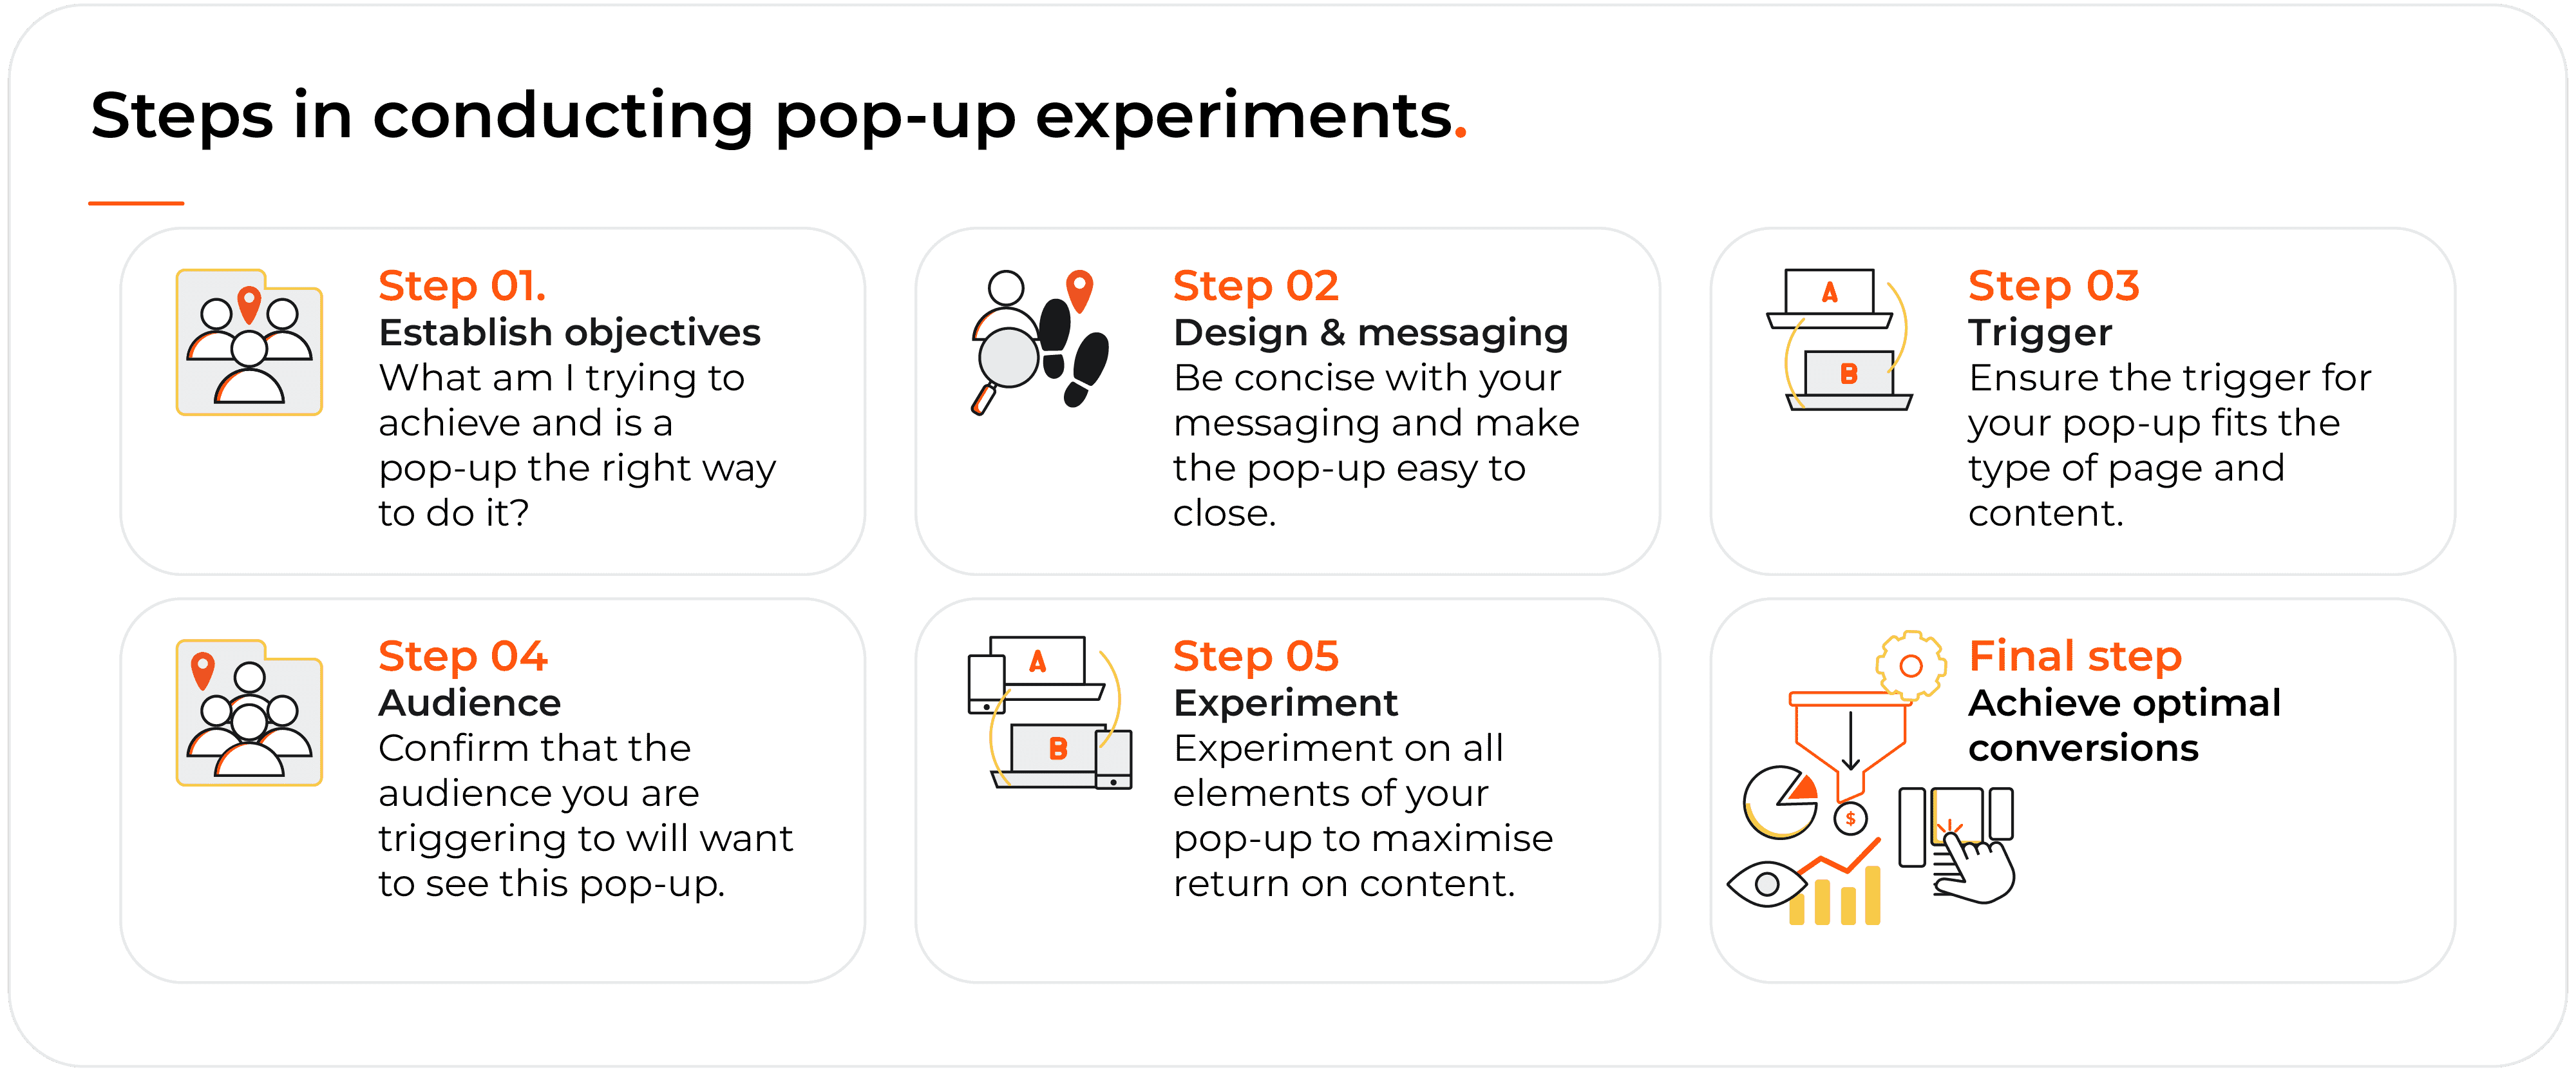 Steps in conducting pop-ups experiment illustration